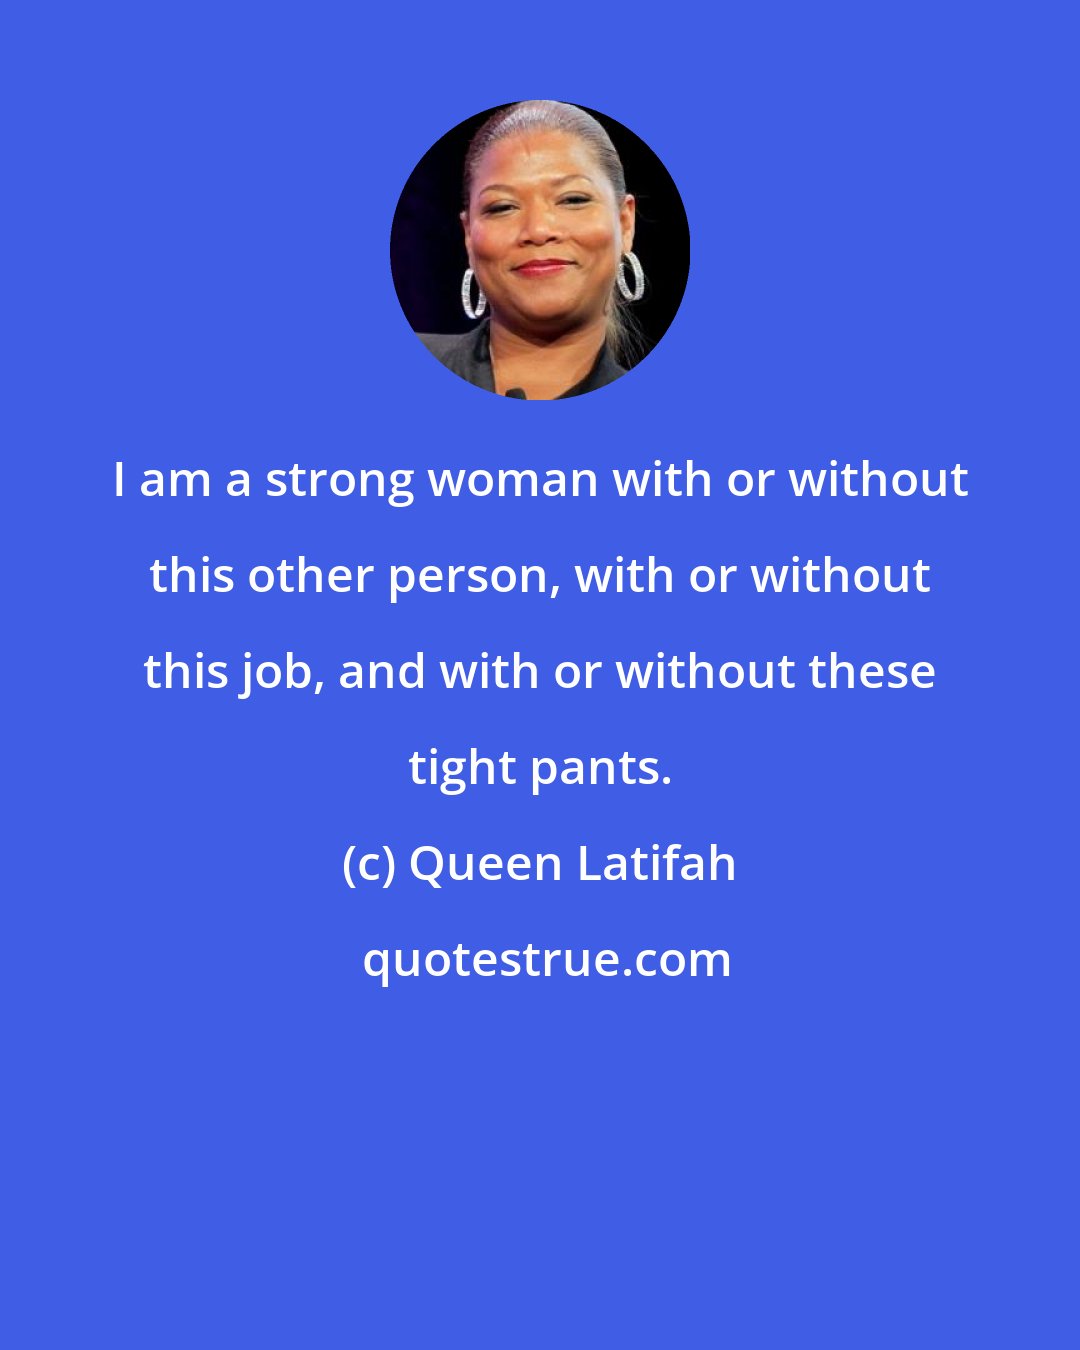 Queen Latifah: I am a strong woman with or without this other person, with or without this job, and with or without these tight pants.